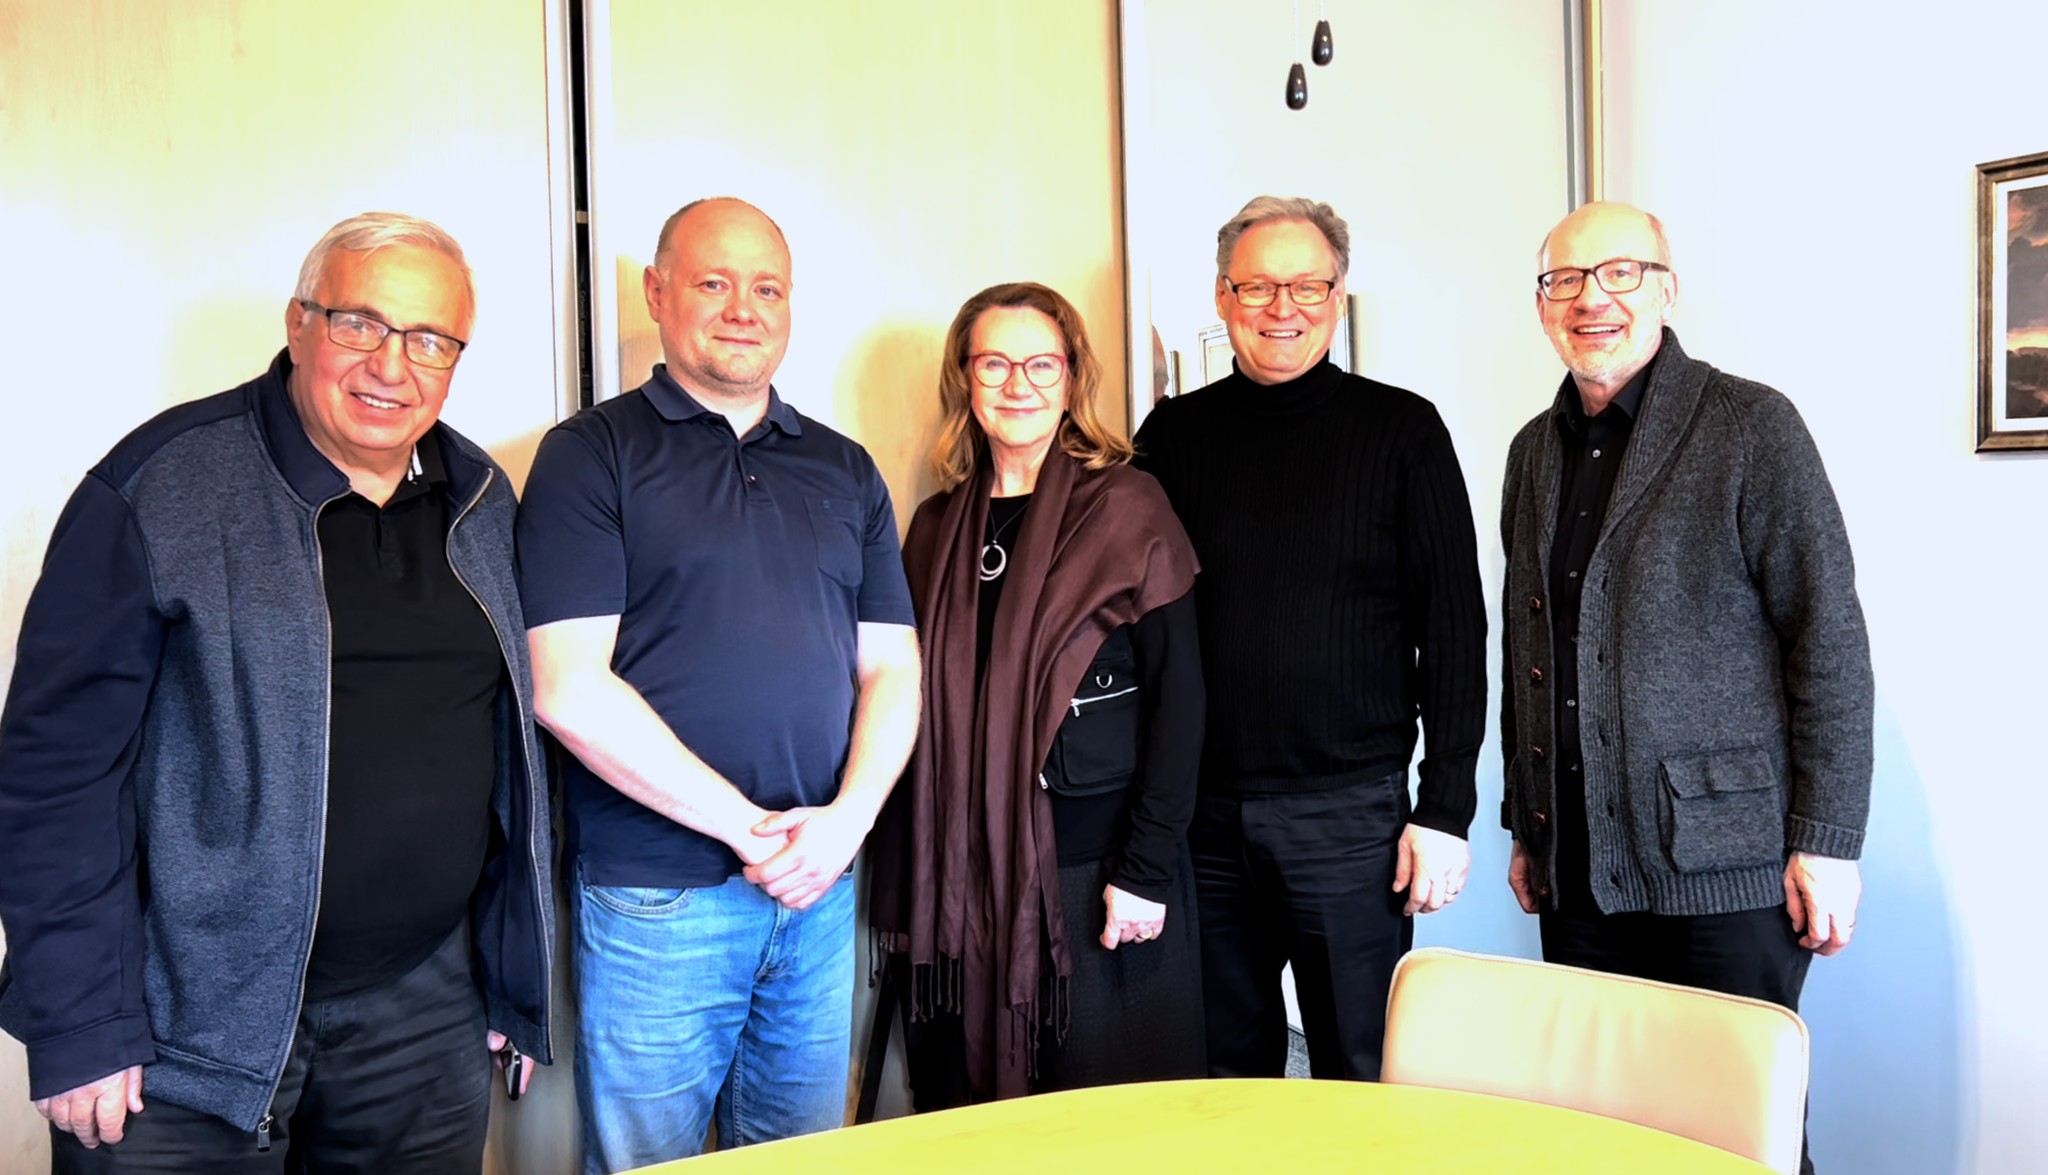 At the local church in Warsaw. The urgent nature of the project to print 300,000 evangelism books was discussed with church leaders.  The project is progressing.